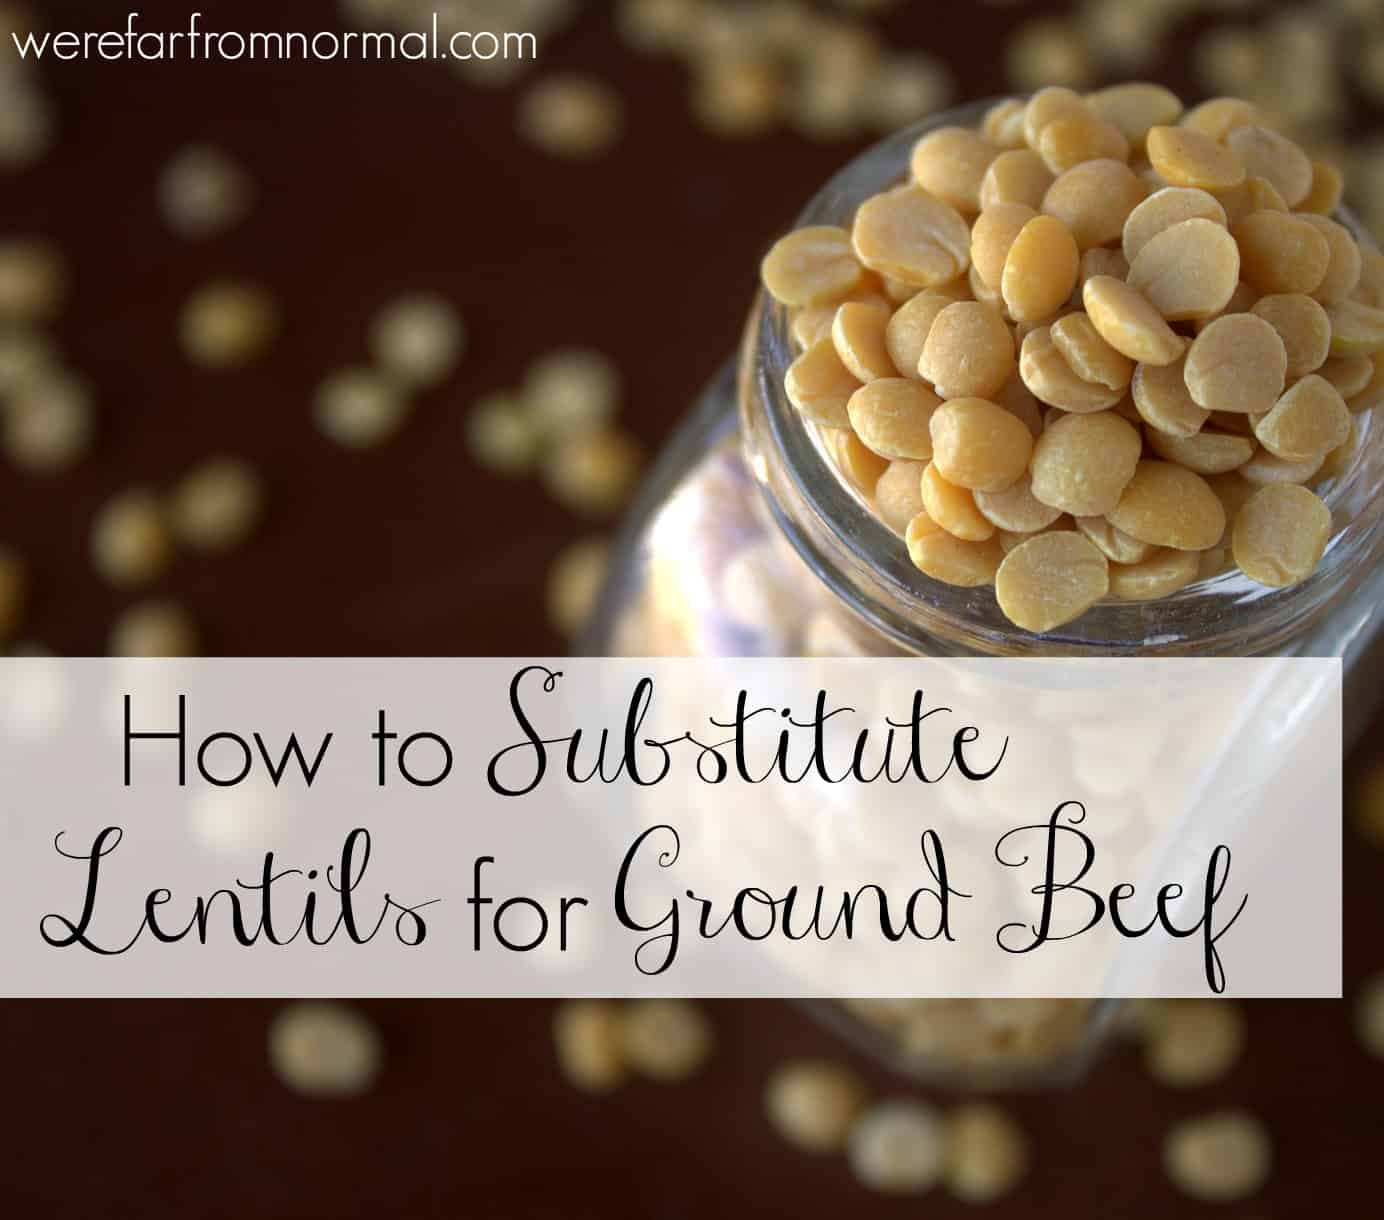 How to Substitute Lentils for Ground Beef